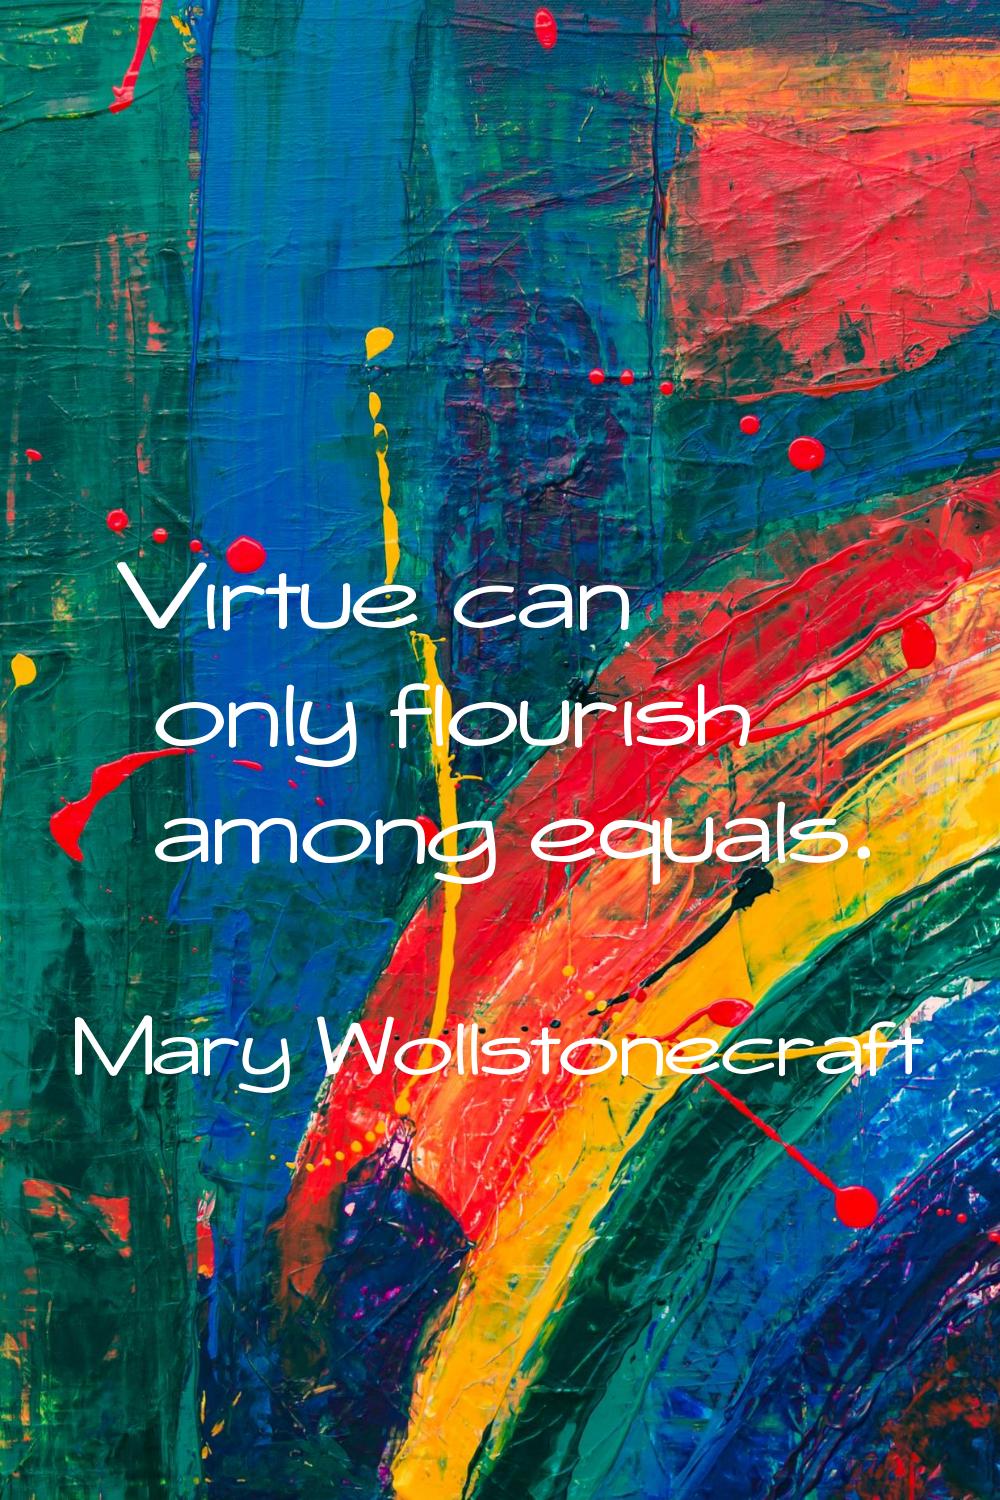 Virtue can only flourish among equals.